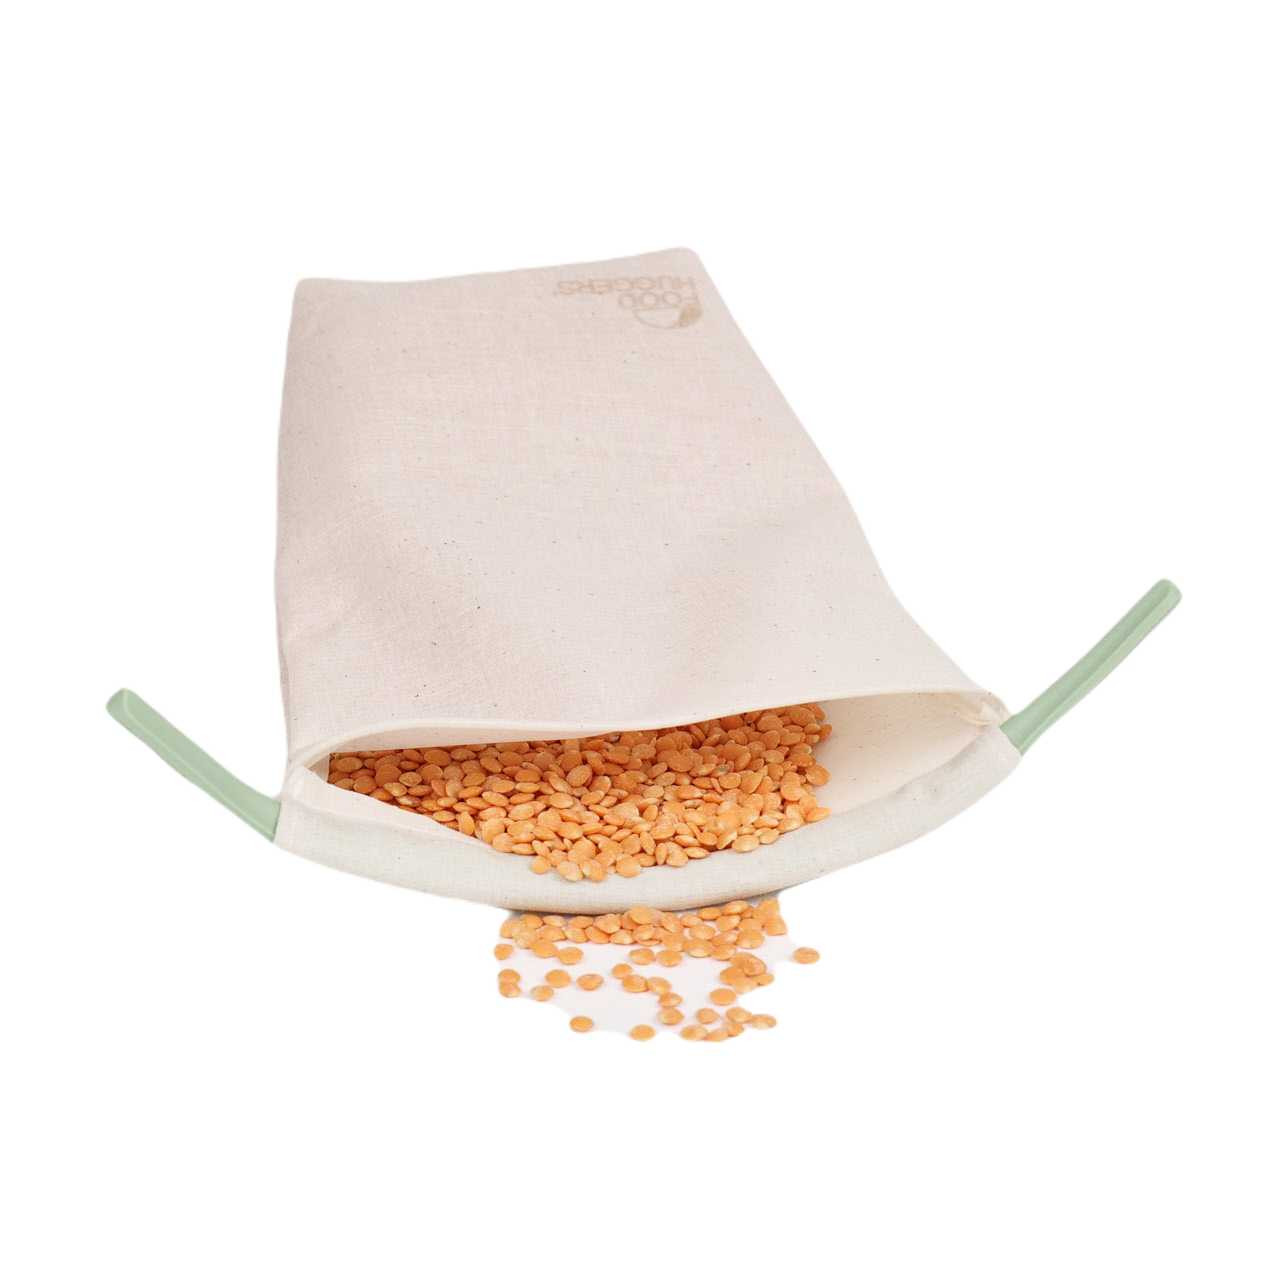 https://cdn11.bigcommerce.com/s-21kj3ntgv1/images/stencil/1280x1280/products/594/2544/Food-Huggers-Fabric-Silicone-Reusable-Coffee-Bag-with-lentils__21066.1655749311.jpg?c=2